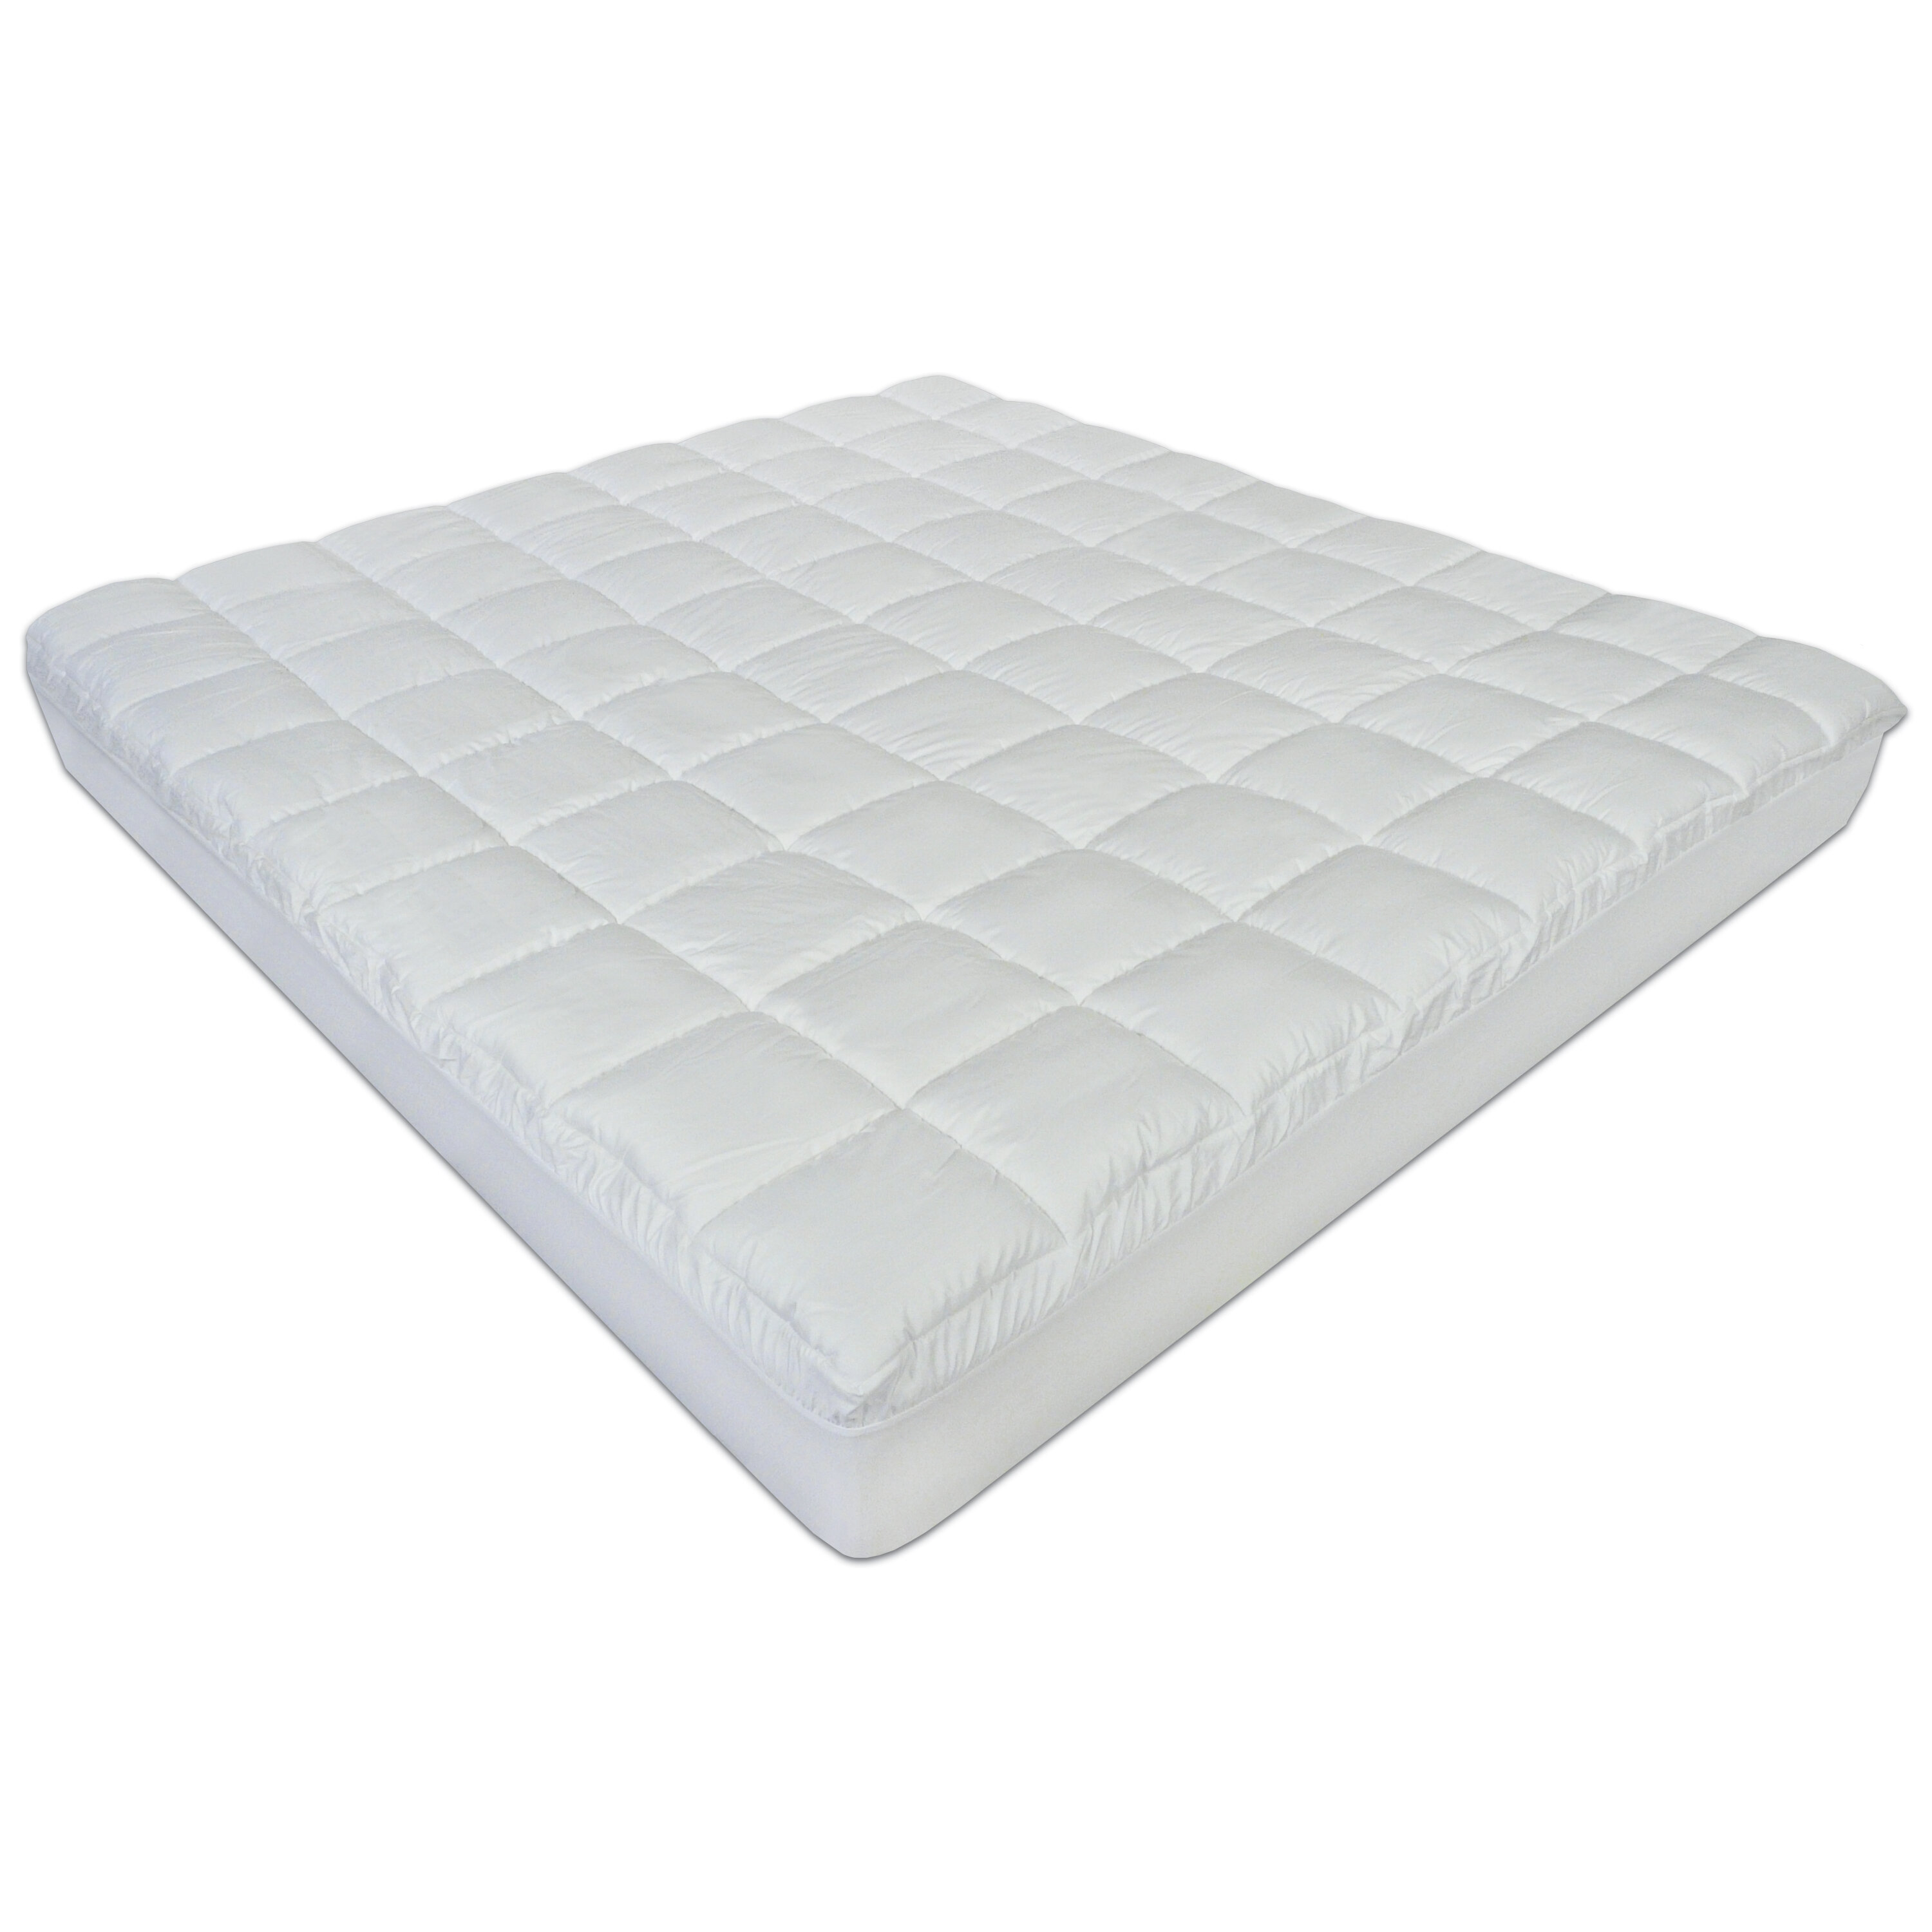 Queen Cotton Mattress Pad Best Fit for Hardside Waterbed Mattresses 60 x 84